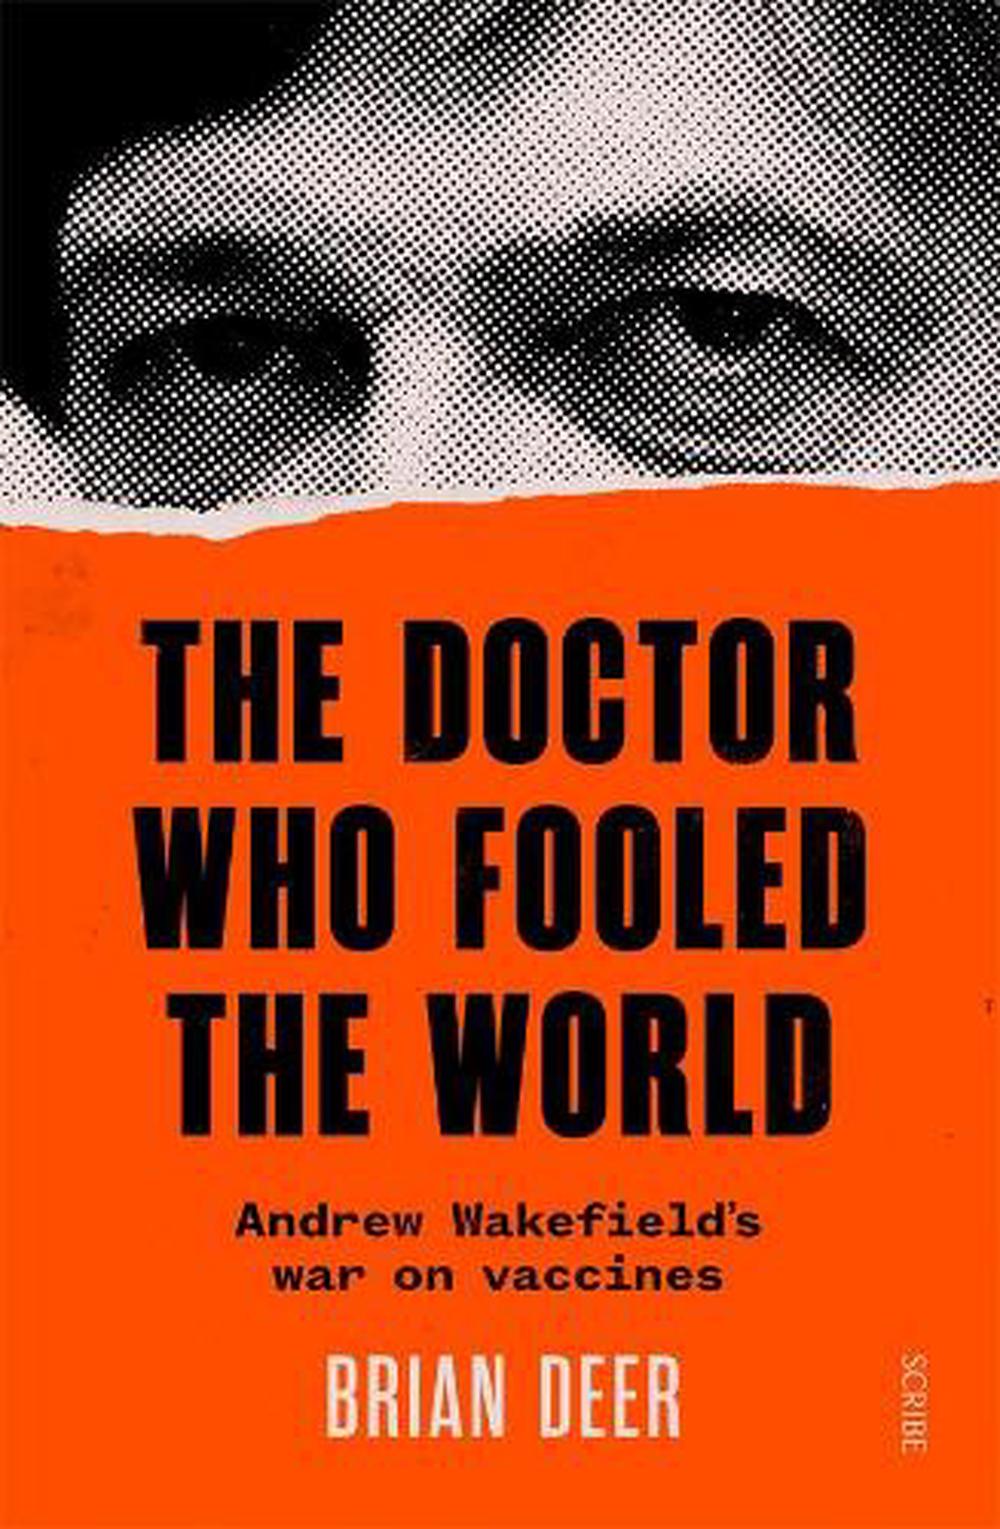 Who　Fooled　Deer,　at　the　Brian　World　Buy　by　Nile　Paperback,　9781925713688　online　The　The　Doctor